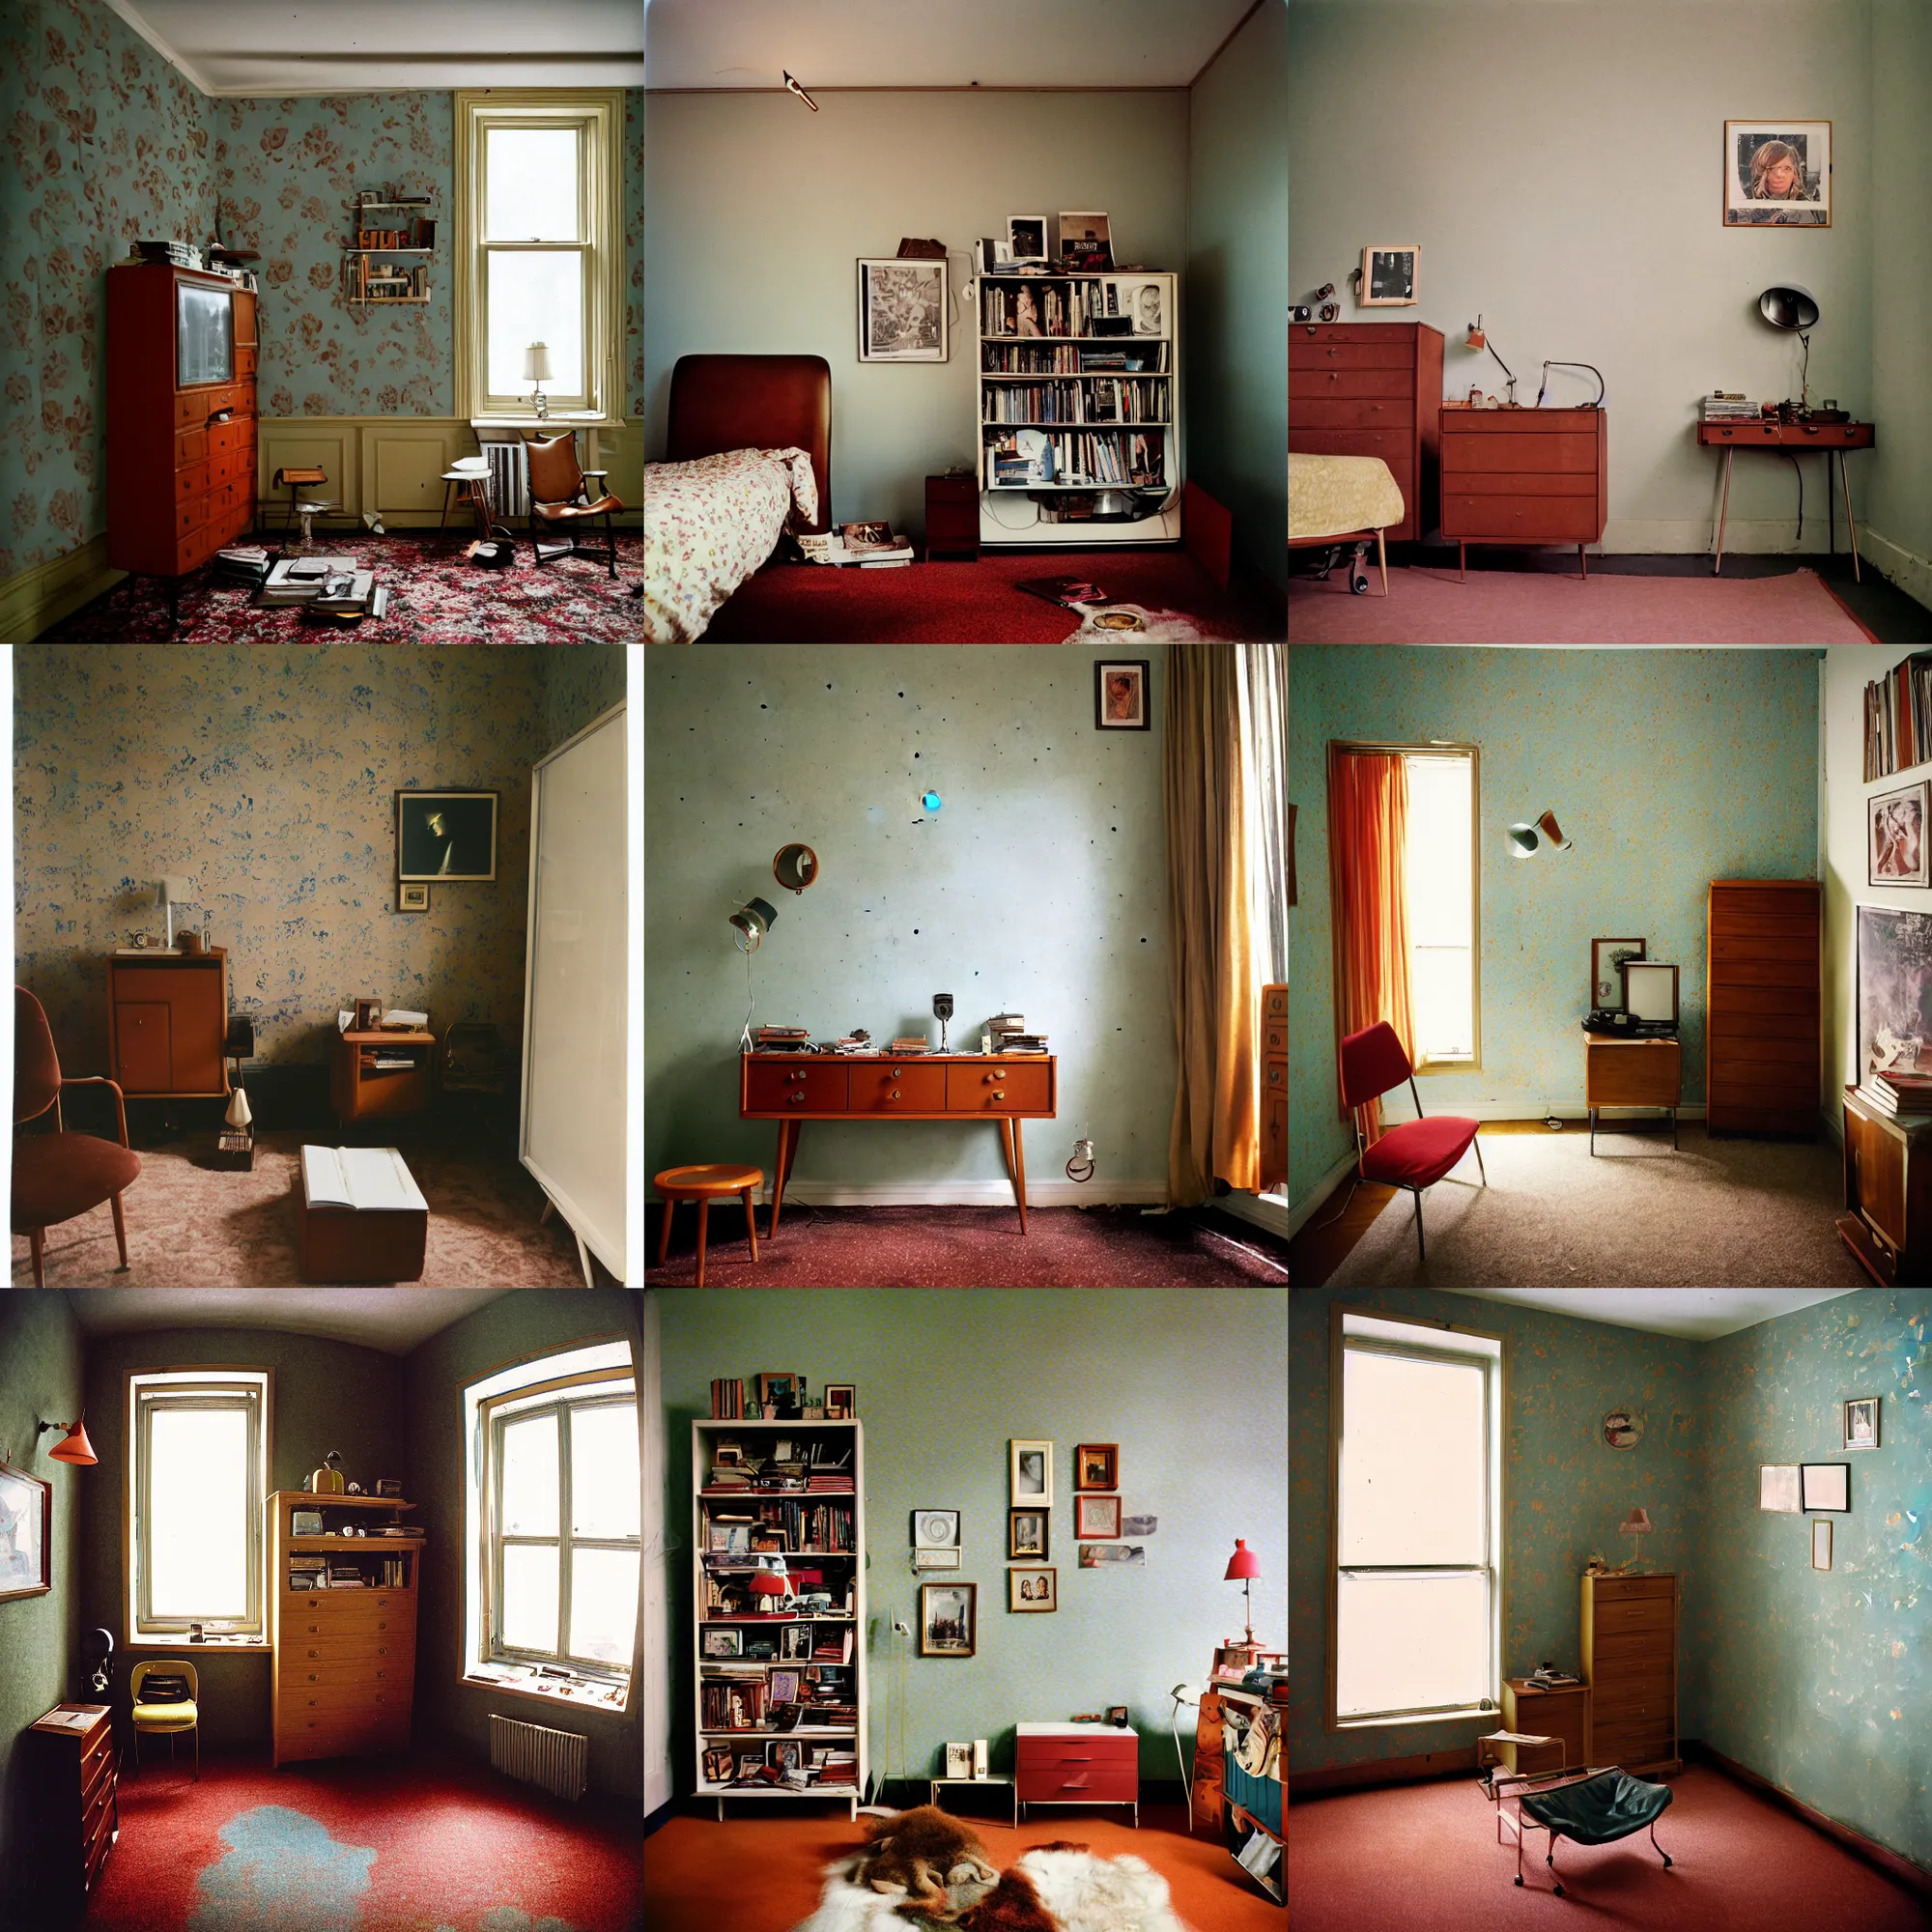 Image similar to kodak portra 4 0 0, wetplate, 8 mm extreme fisheye, award - winning portrait by britt marling of a 1 9 6 0 s room, picture frames, shining lamps, dust, 1 9 6 0 s metal bauhaus furniture, wallpaper, carpet, books, muted colours,